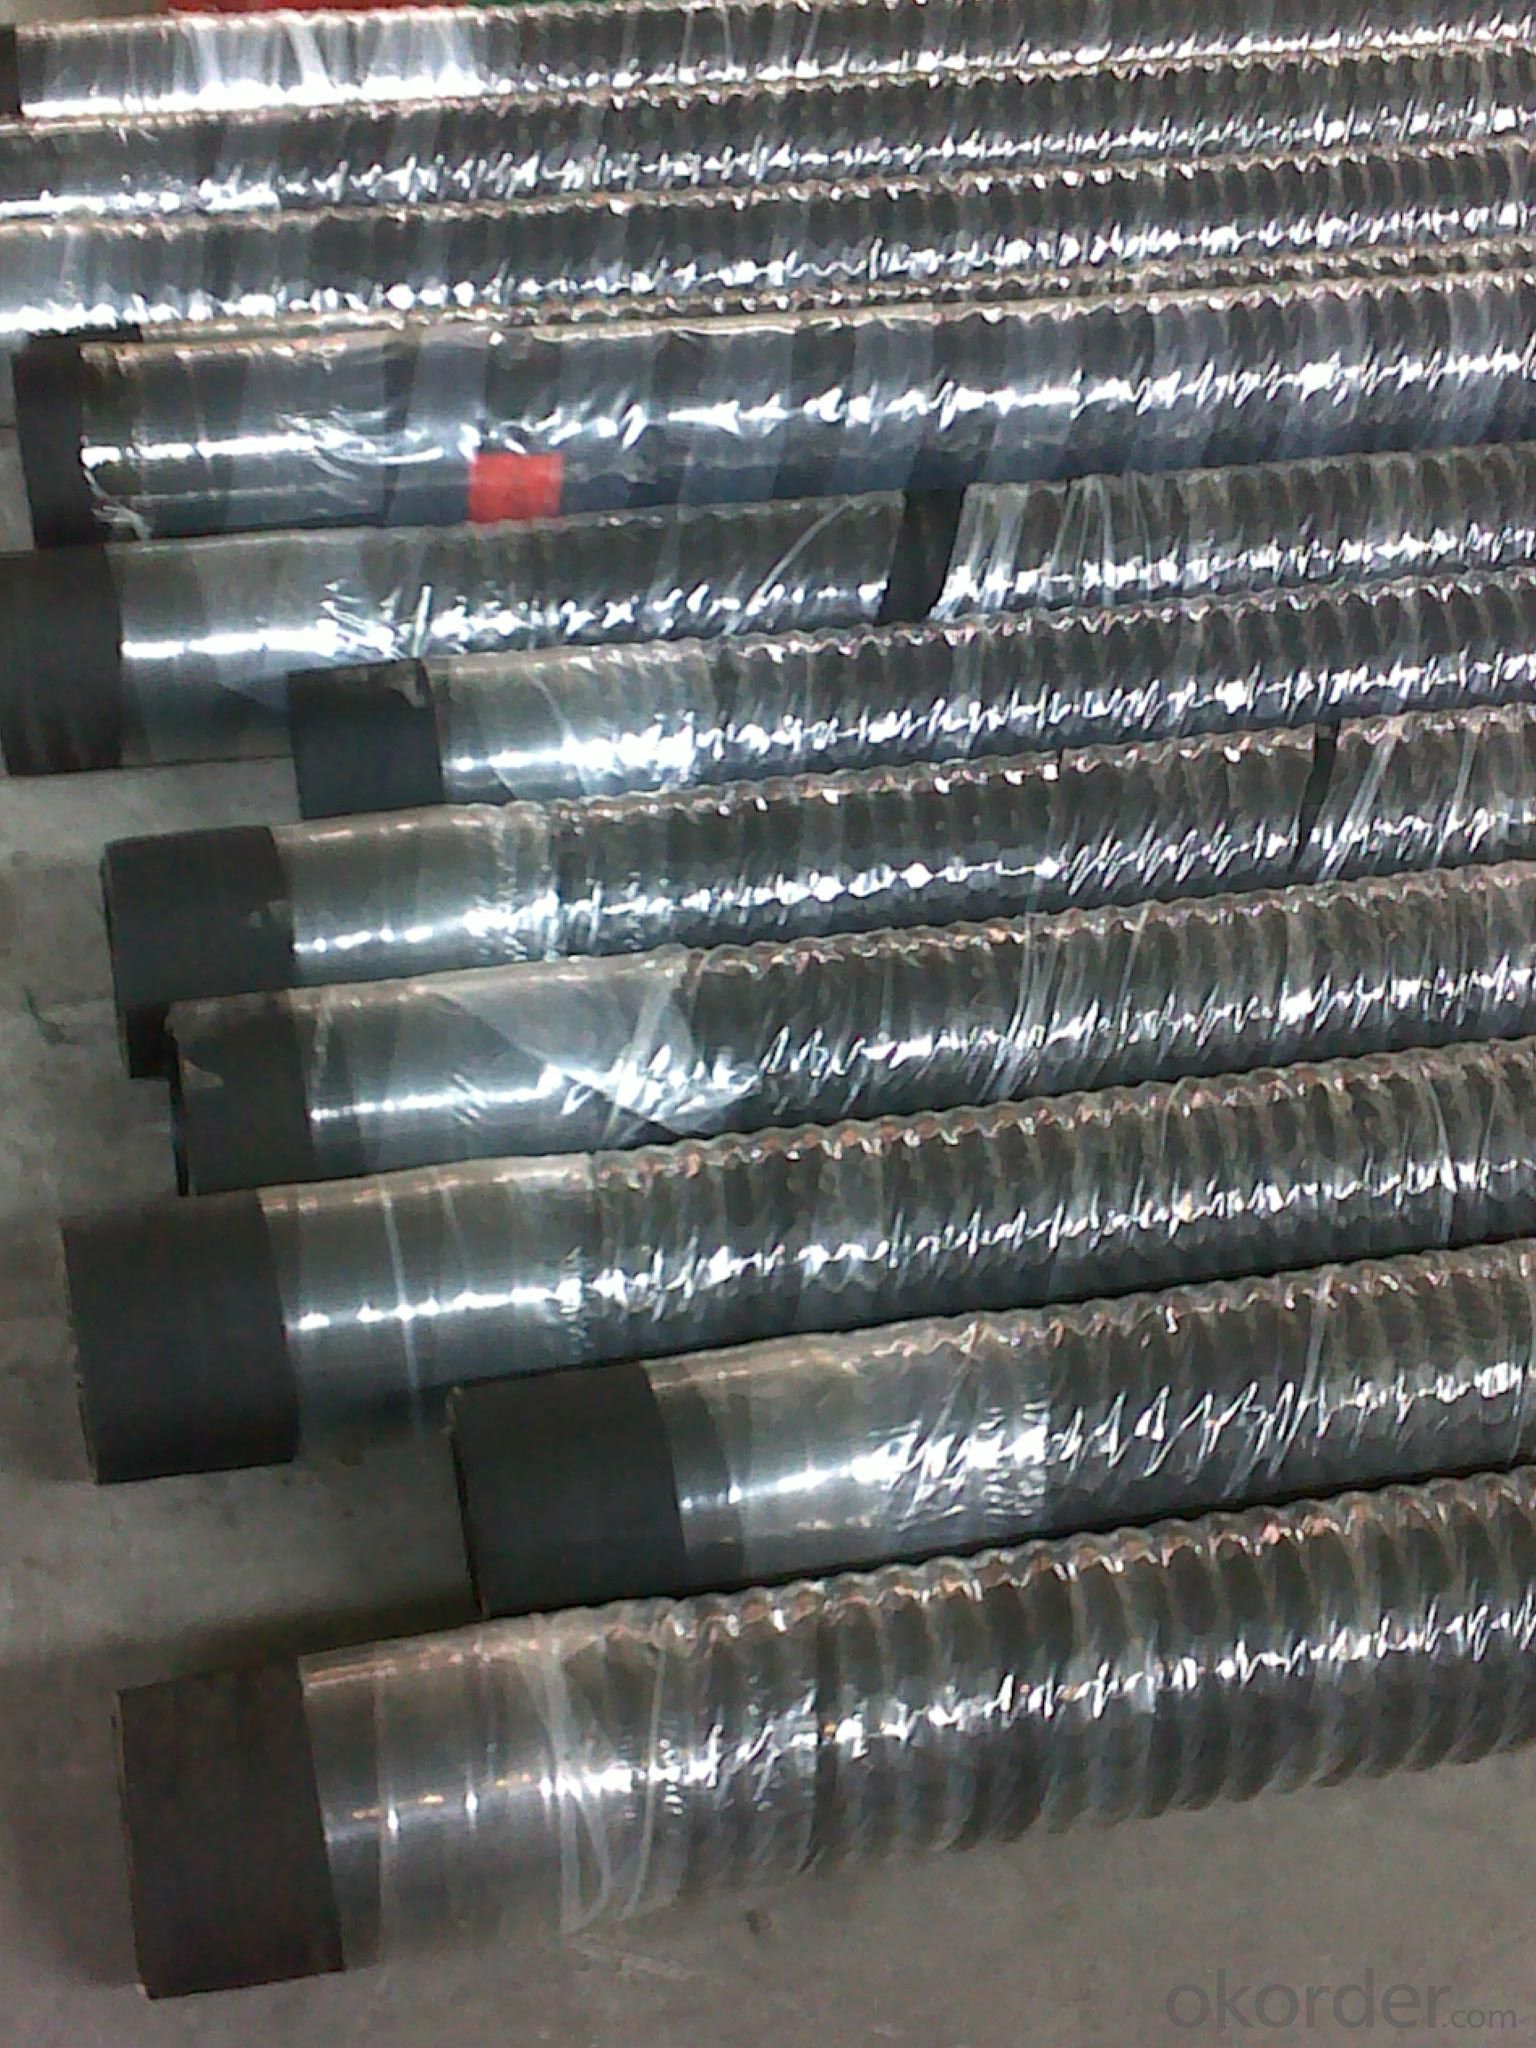 Corrugated Water Suction Hose--Wire Reinforced Hose